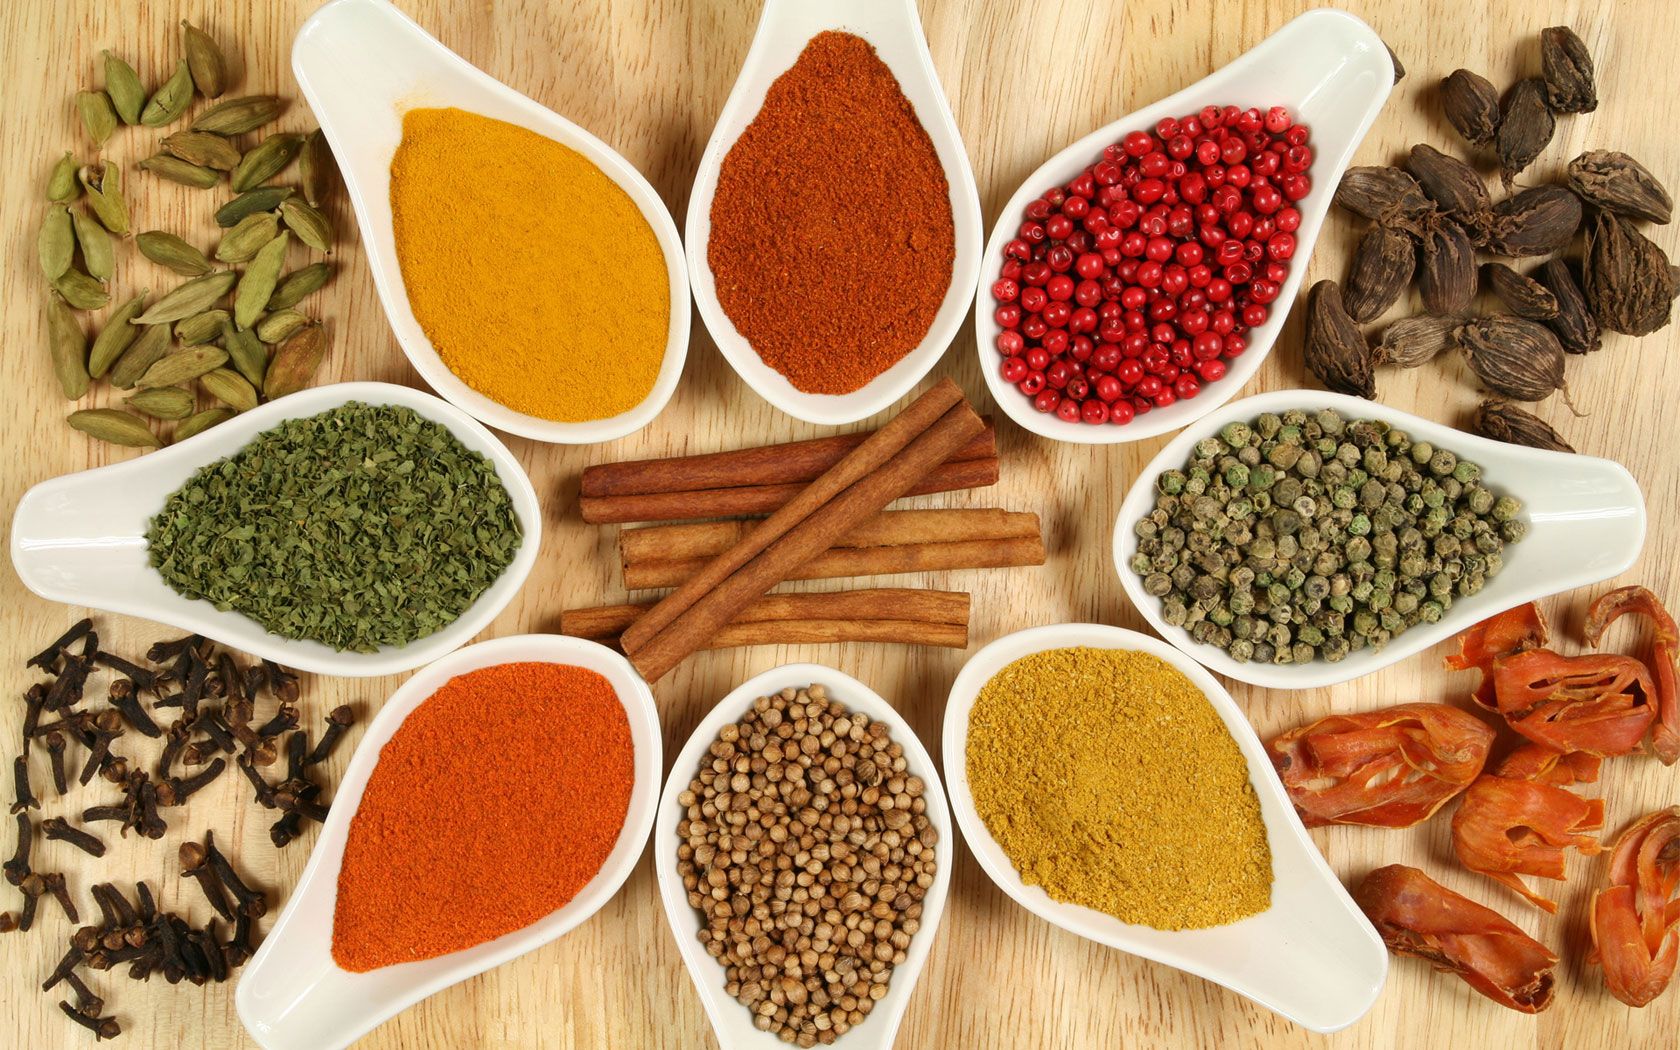 Spices & Blended spices (masala)